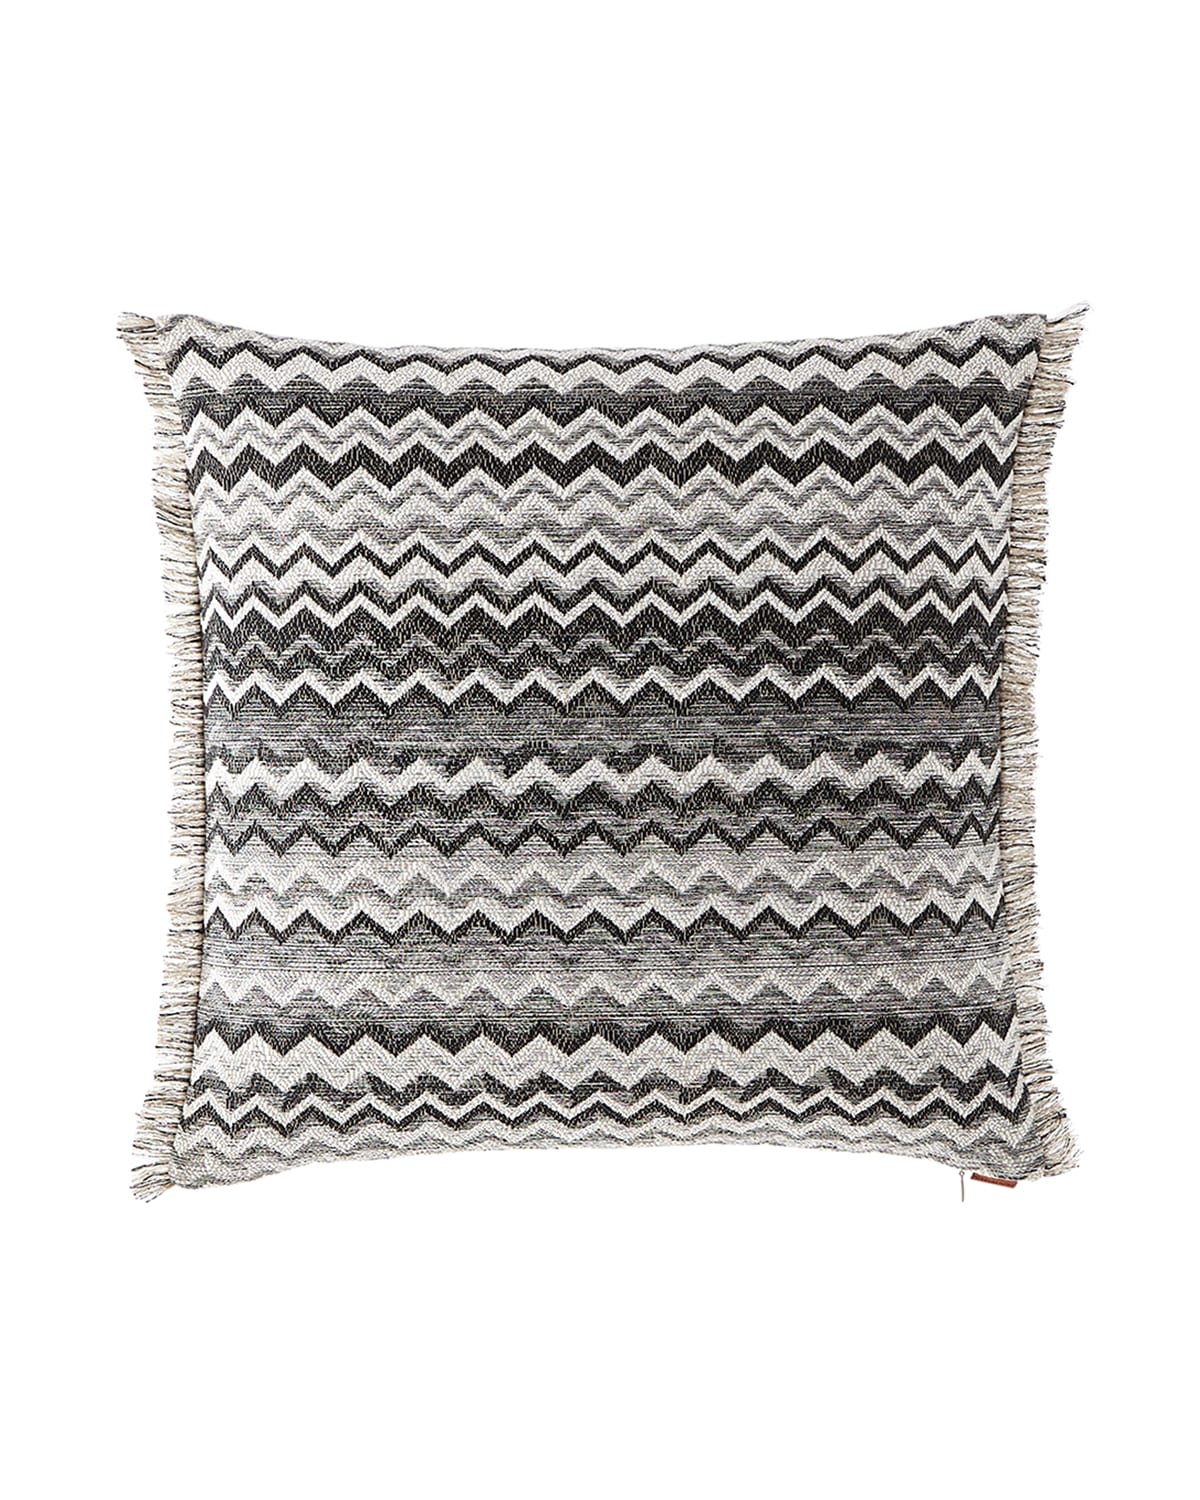 Image Missoni Home Wipptal Pillow, 20"Sq.